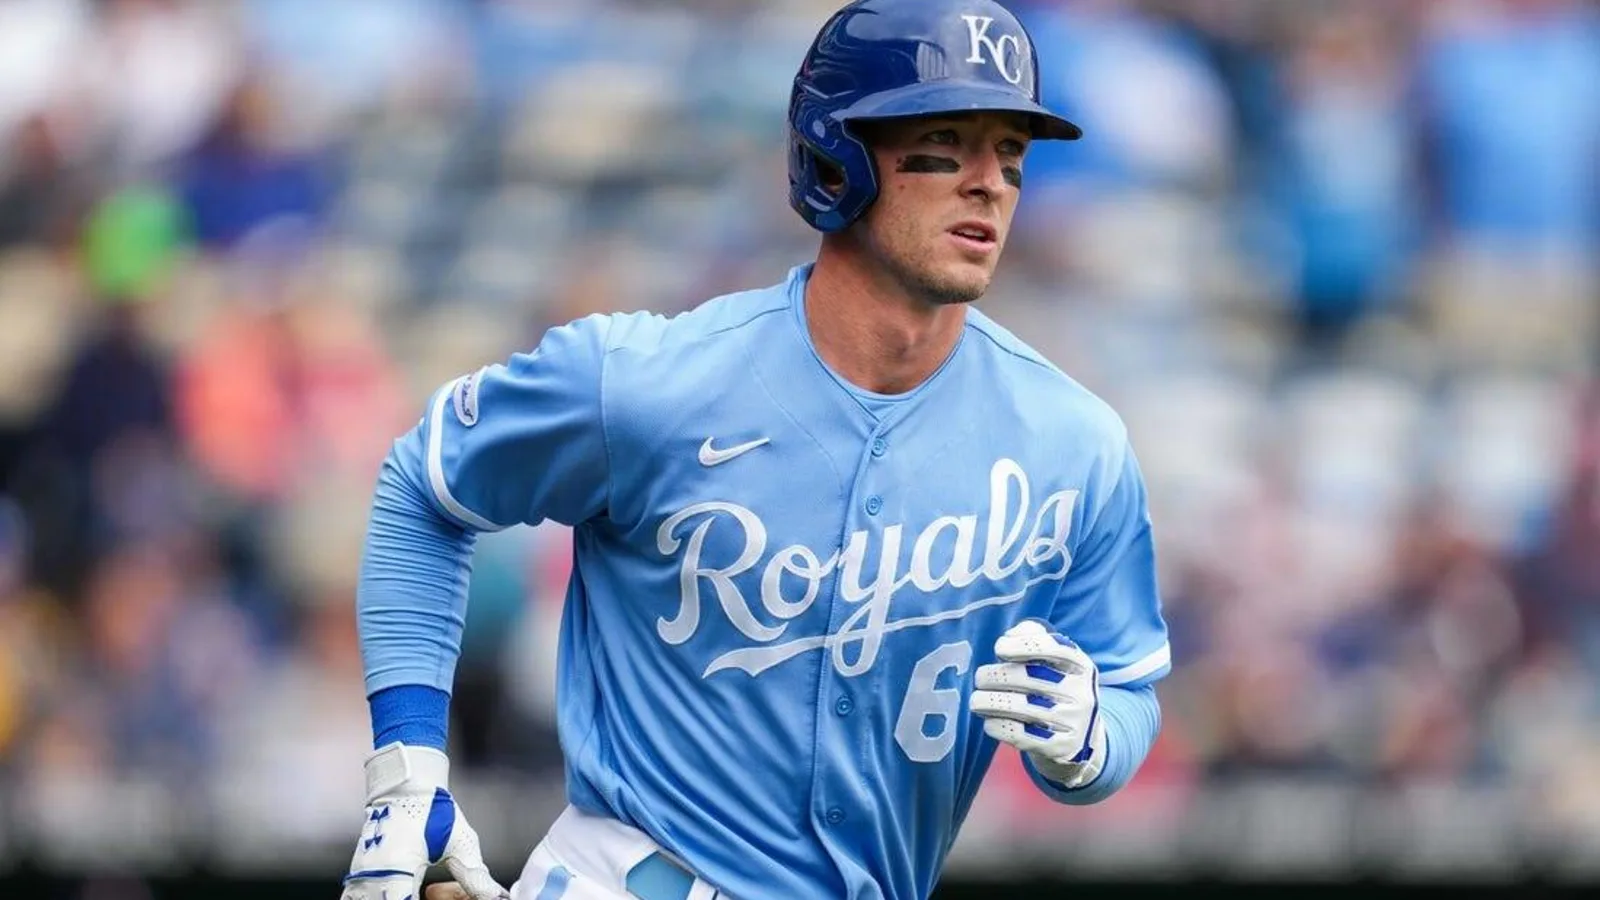 Royals call up Nick Pratto, Drew Waters from Omaha (AAA)